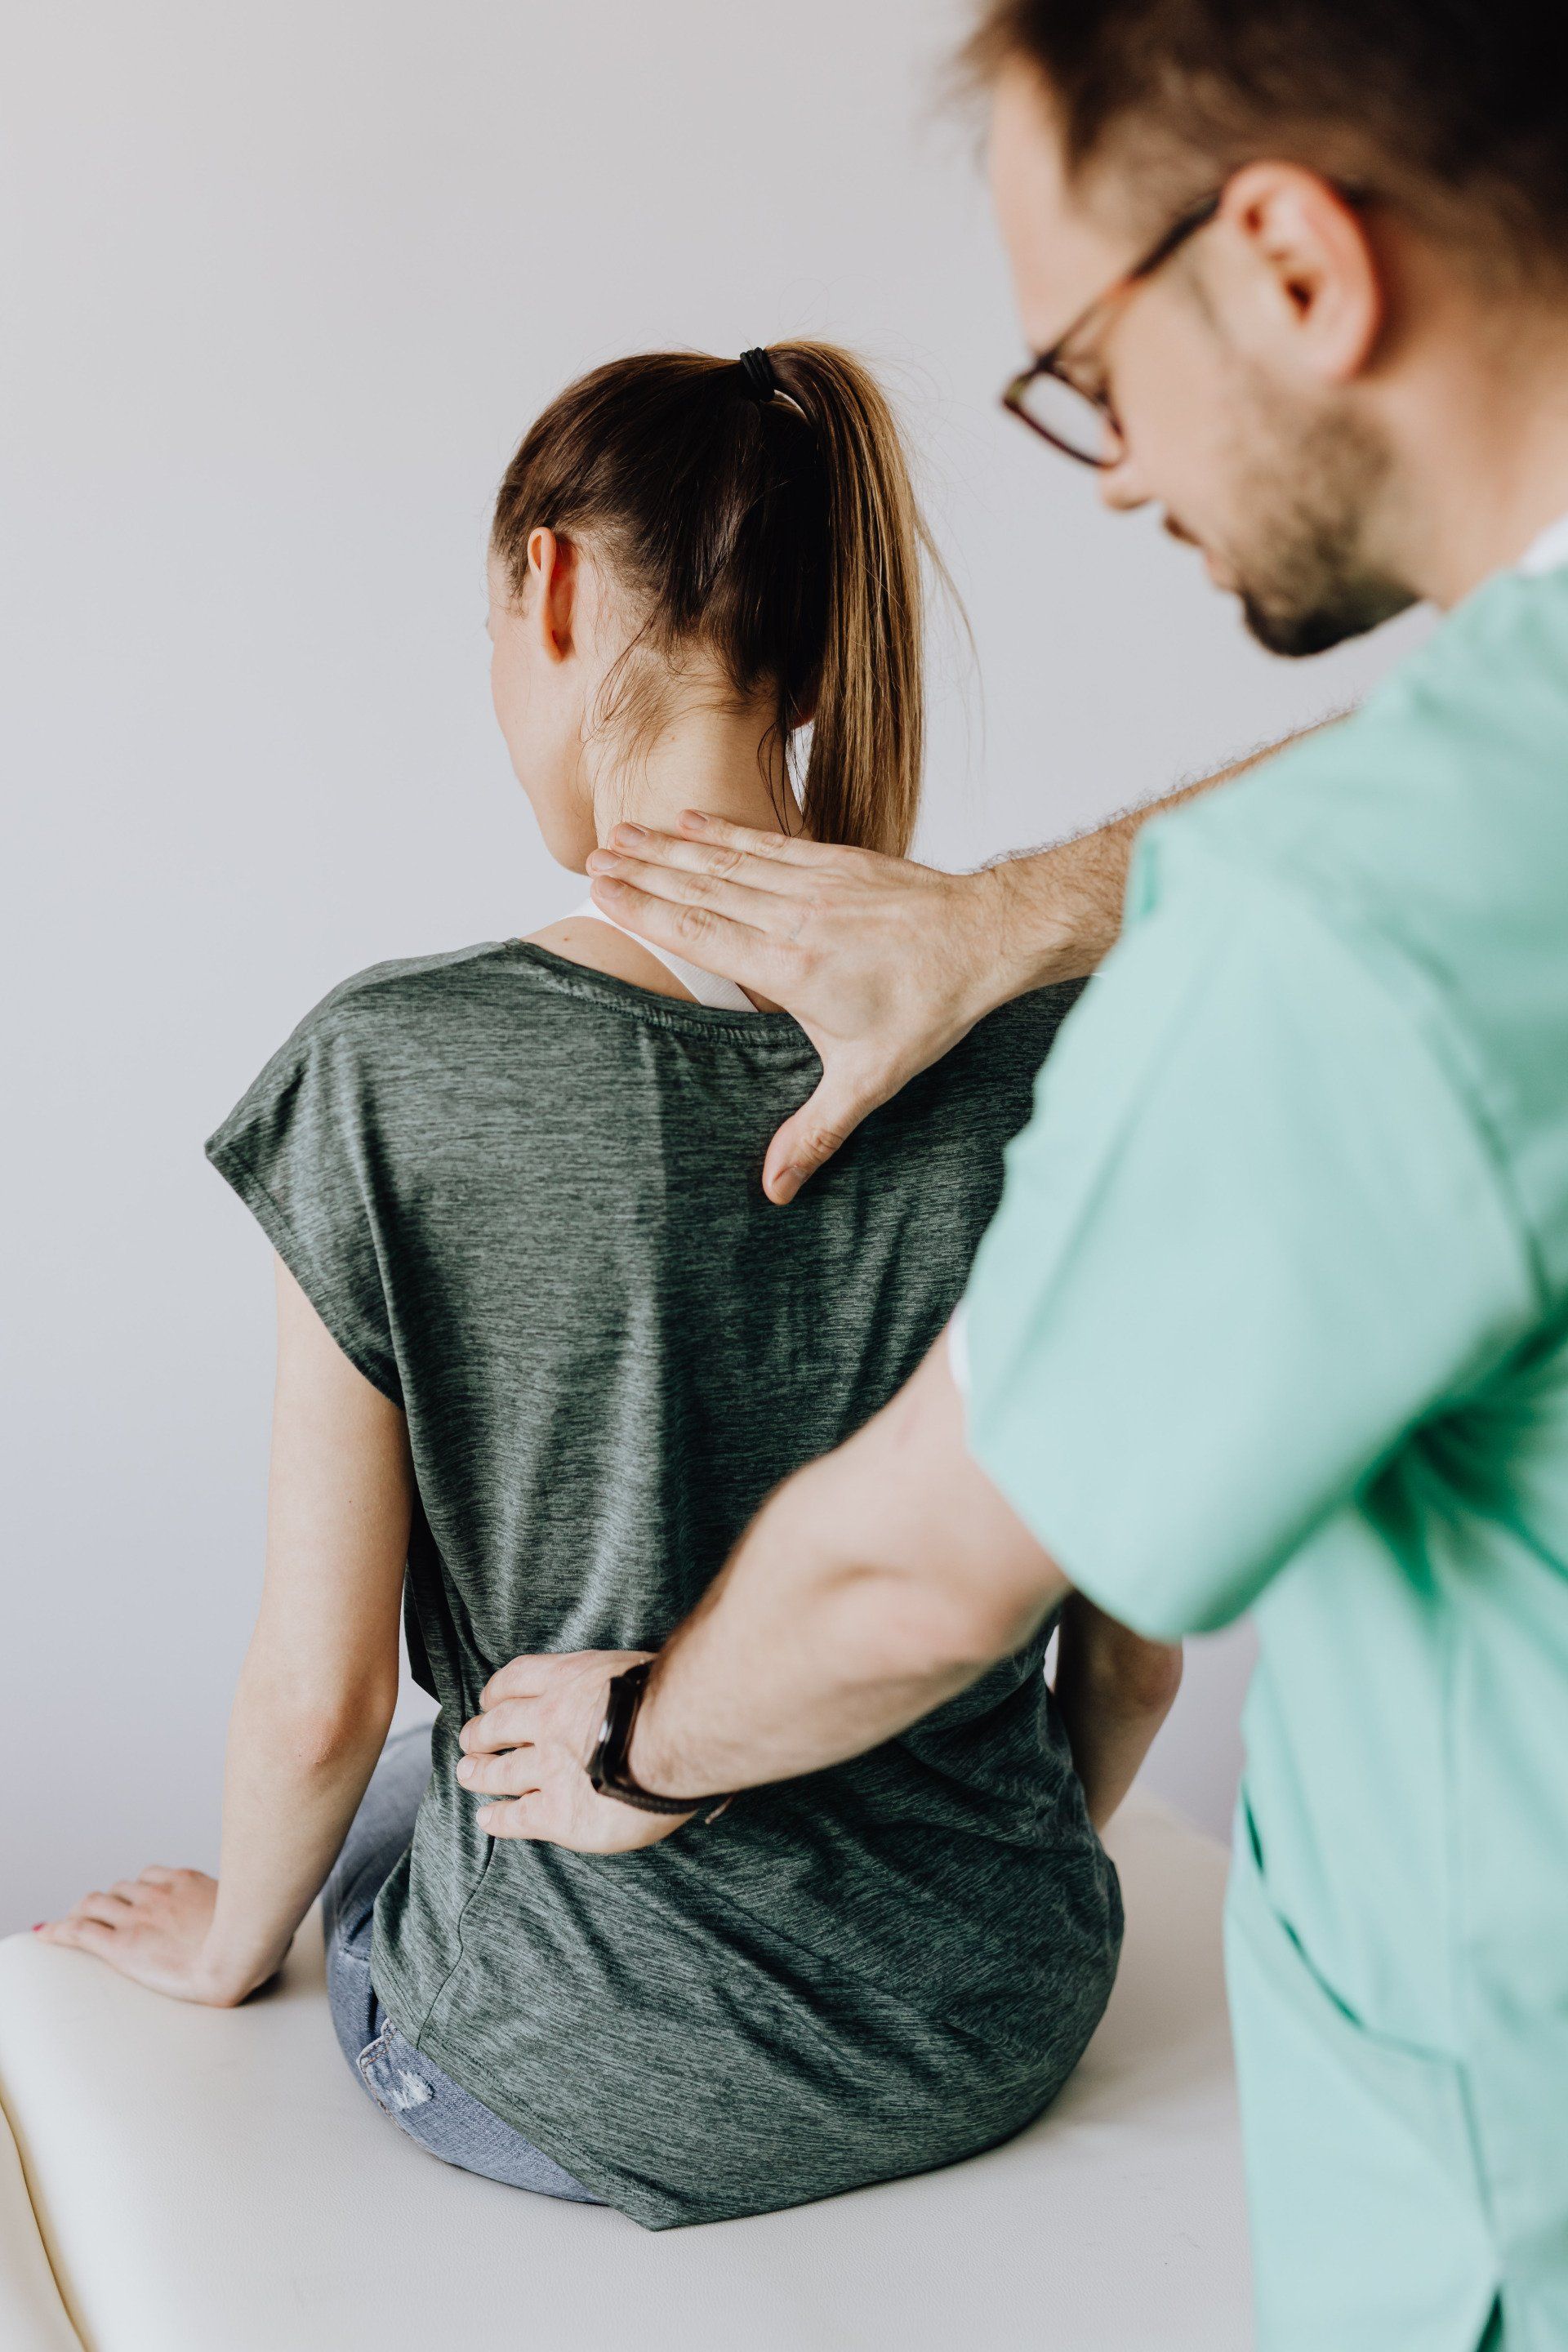 Chiropractor gently examining female patient's back